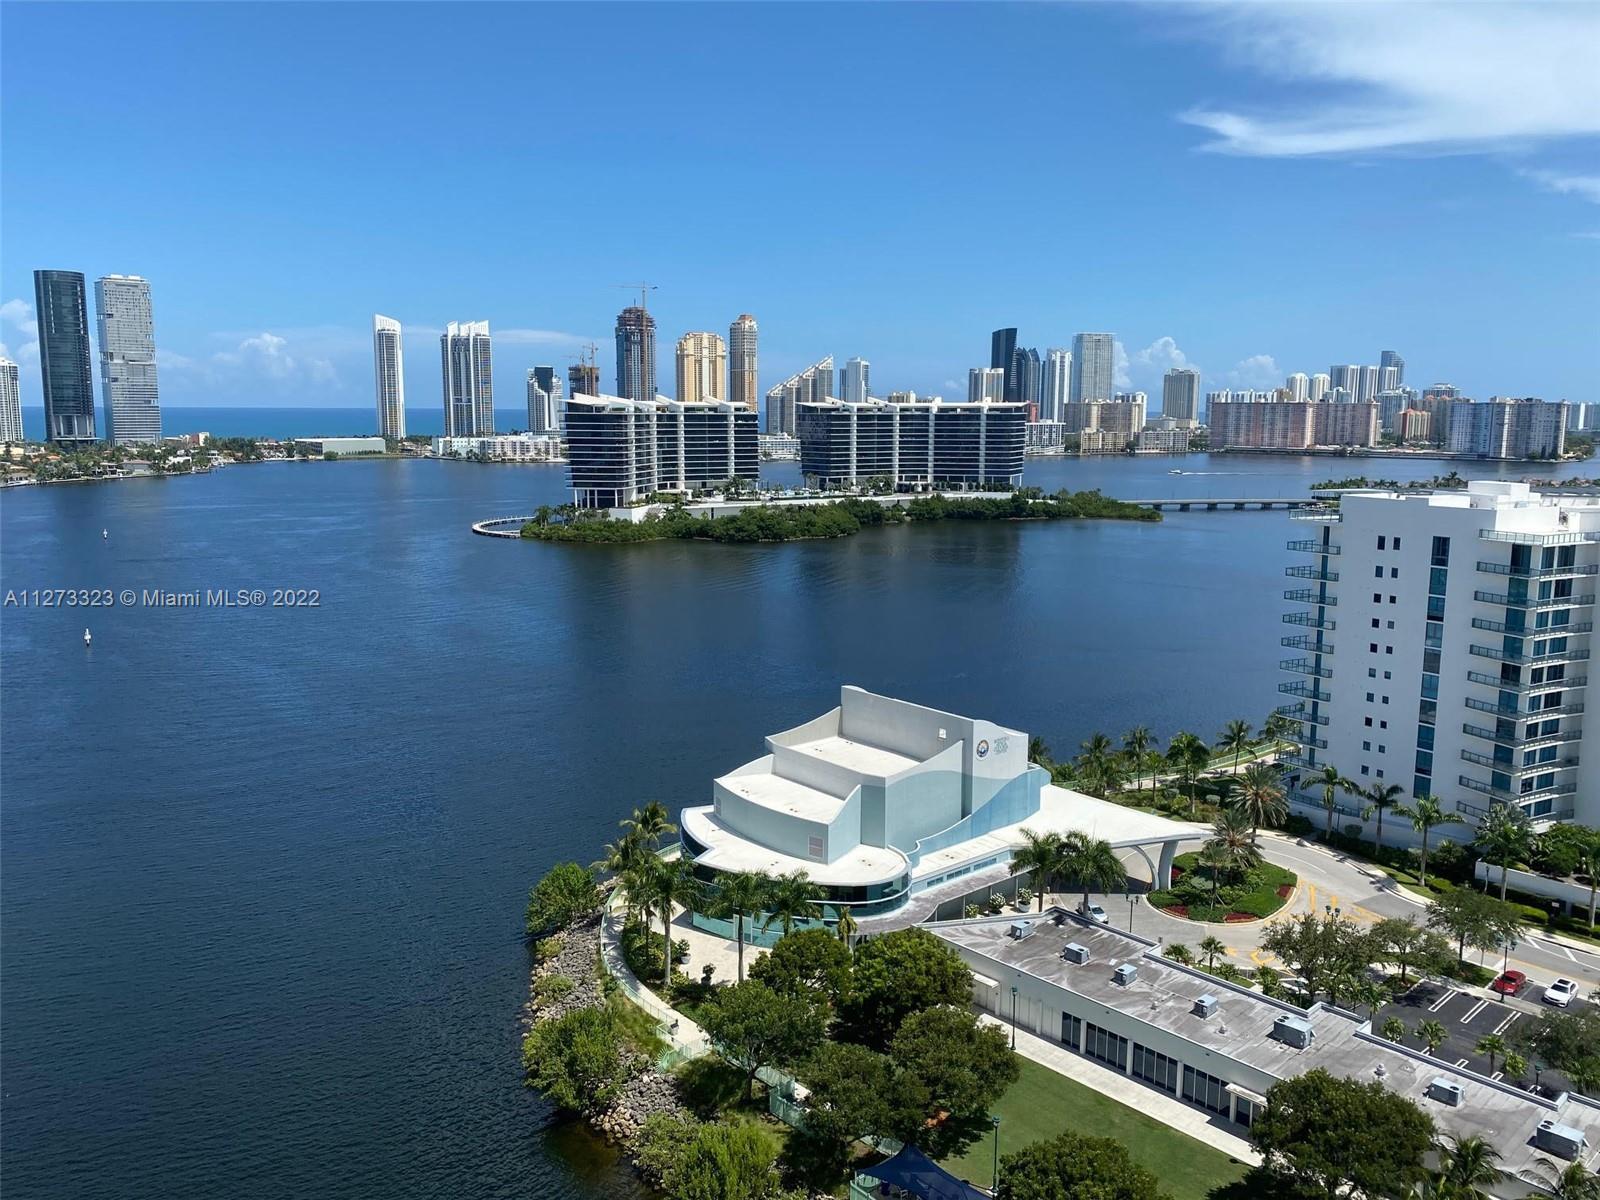 Luxury waterfront 2 Bedrooms + Large Den - 2.5 Bathrooms residence at Aventura Marina, centrally loc